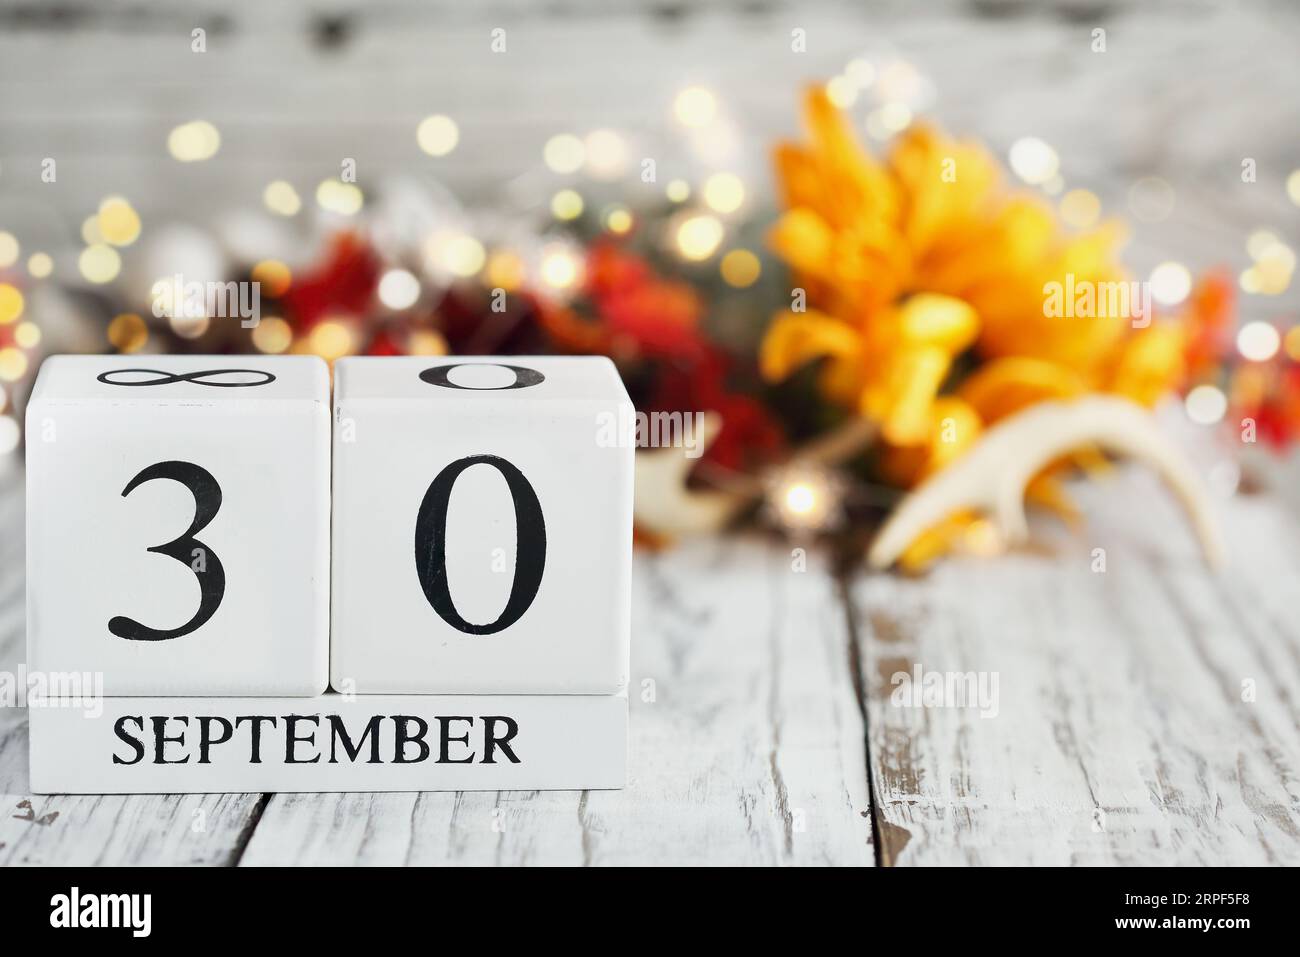 White wood calendar blocks with the date September 30th and autumn decorations over a wooden table. Selective focus with blurred background. Stock Photo